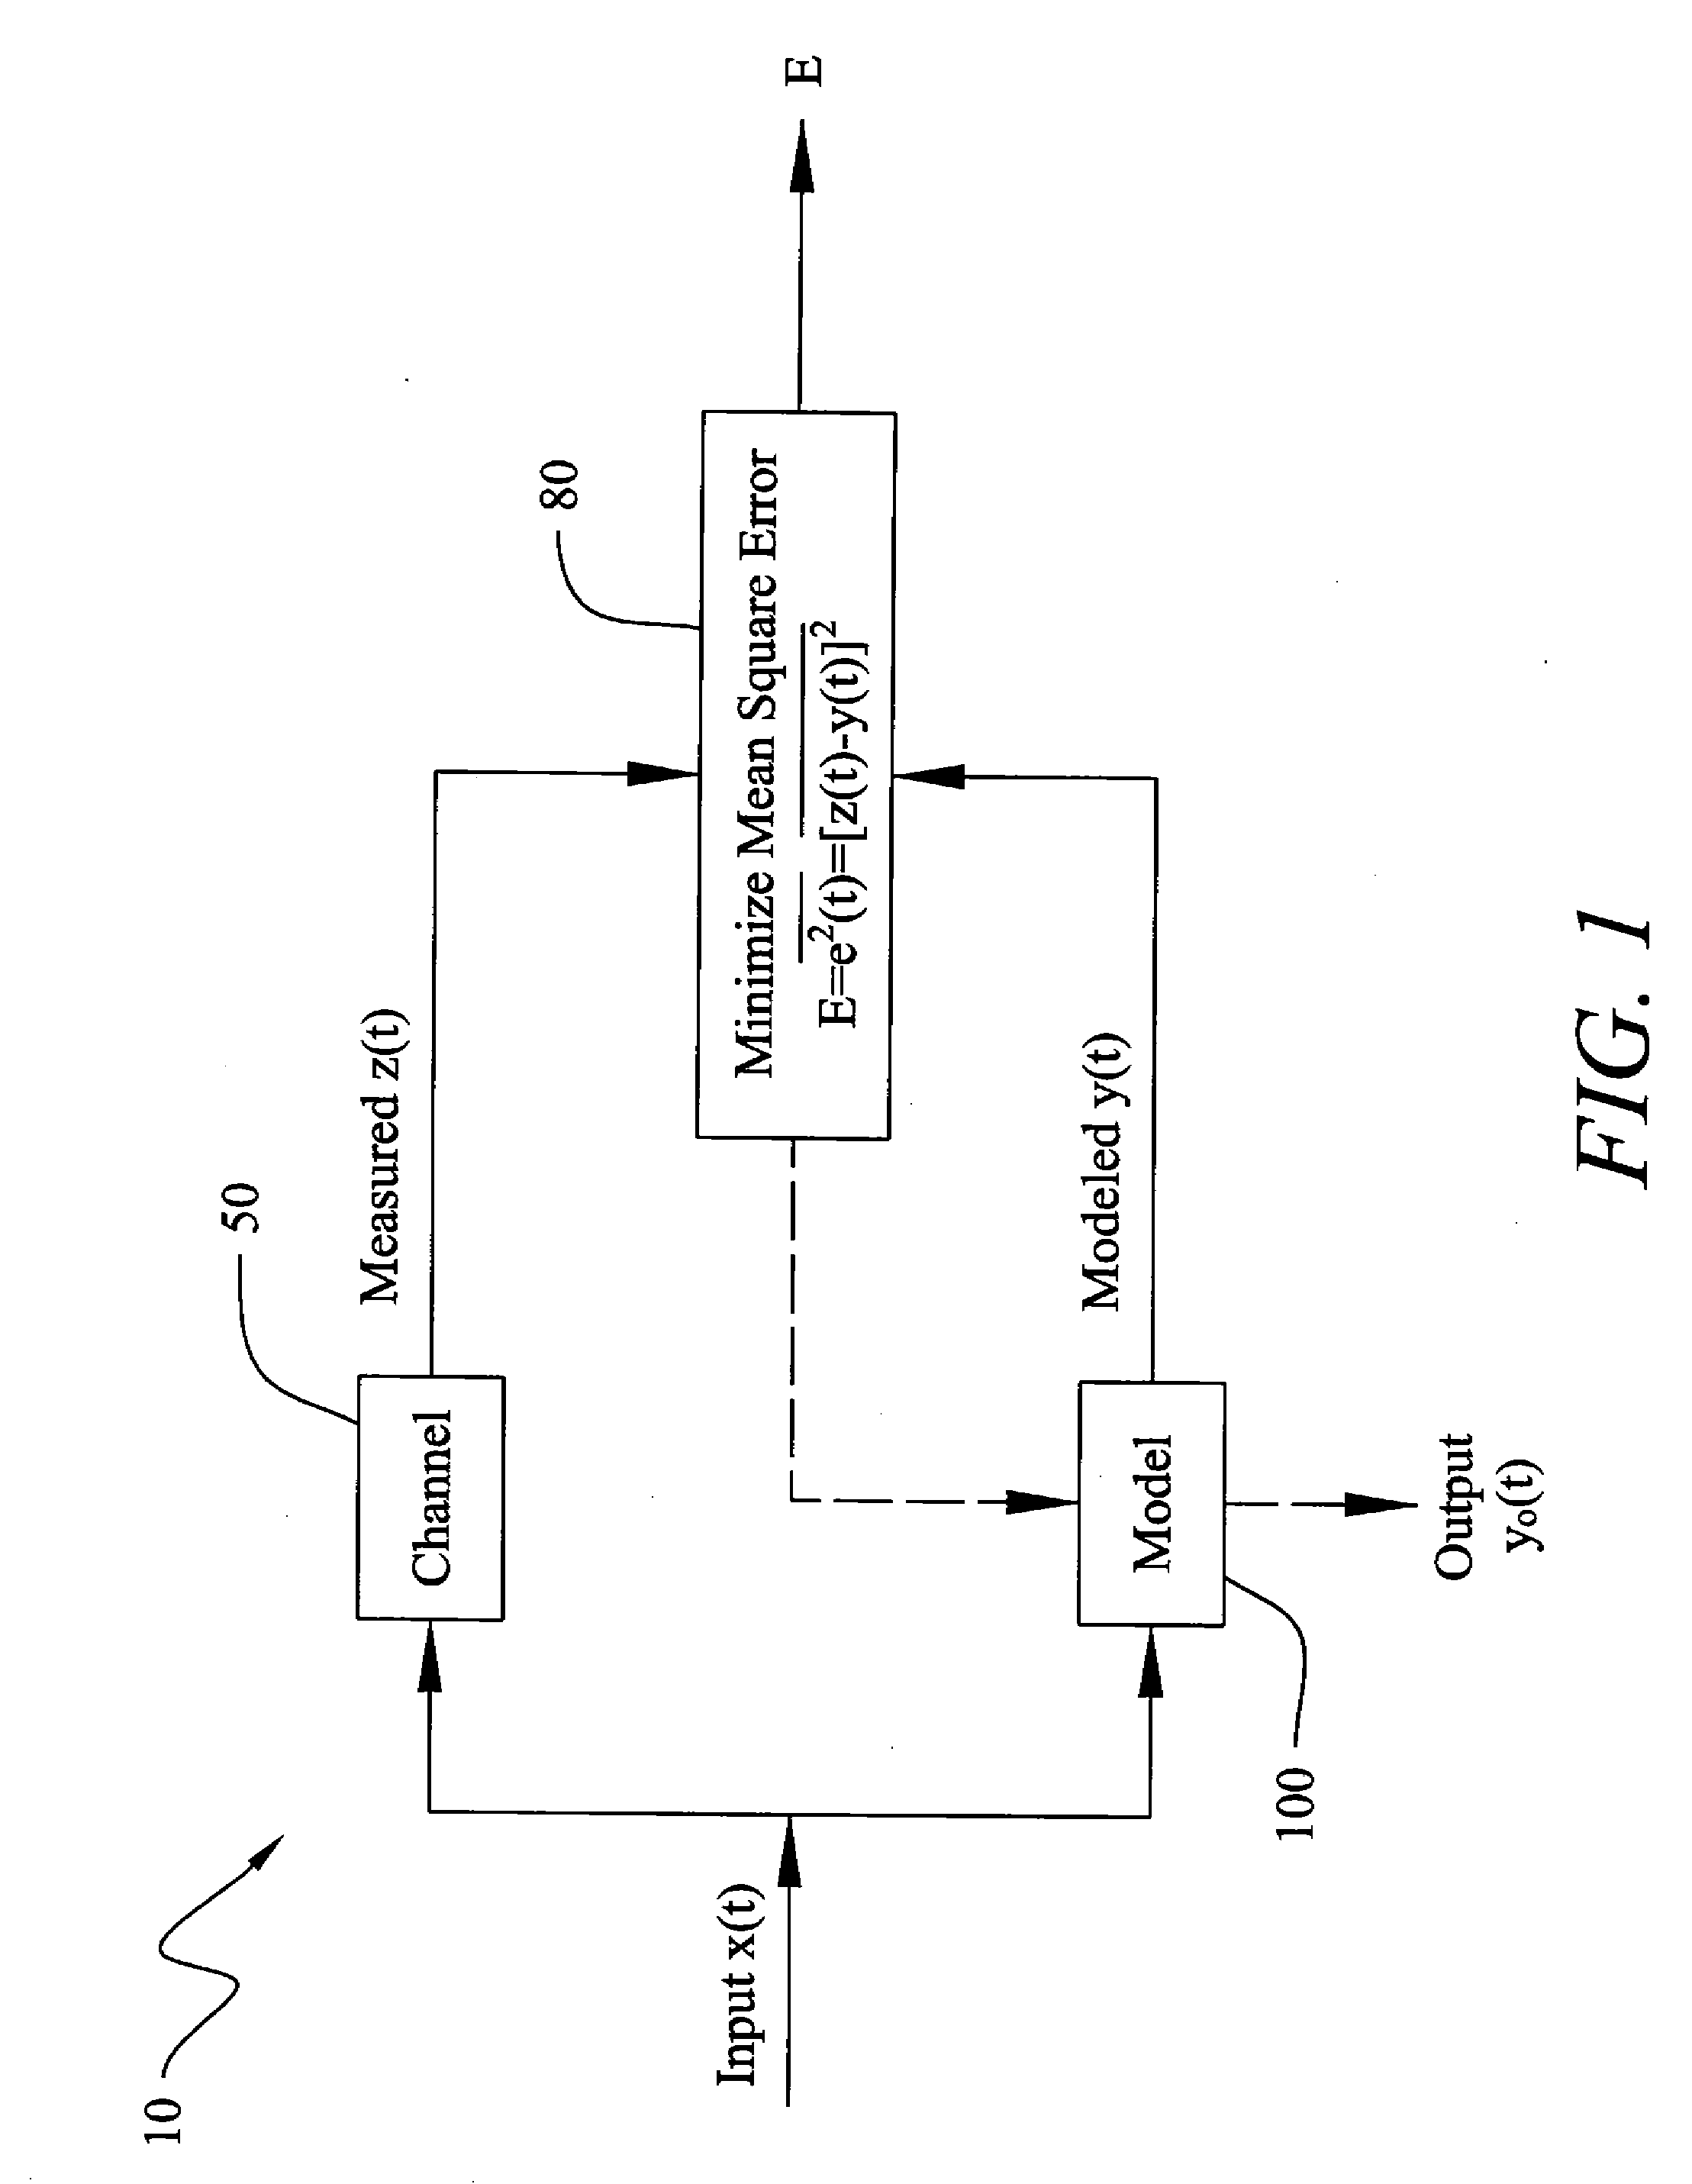 Method and Apparatus for Improved Active Sonar Using Singular Value Decomposition Filtering